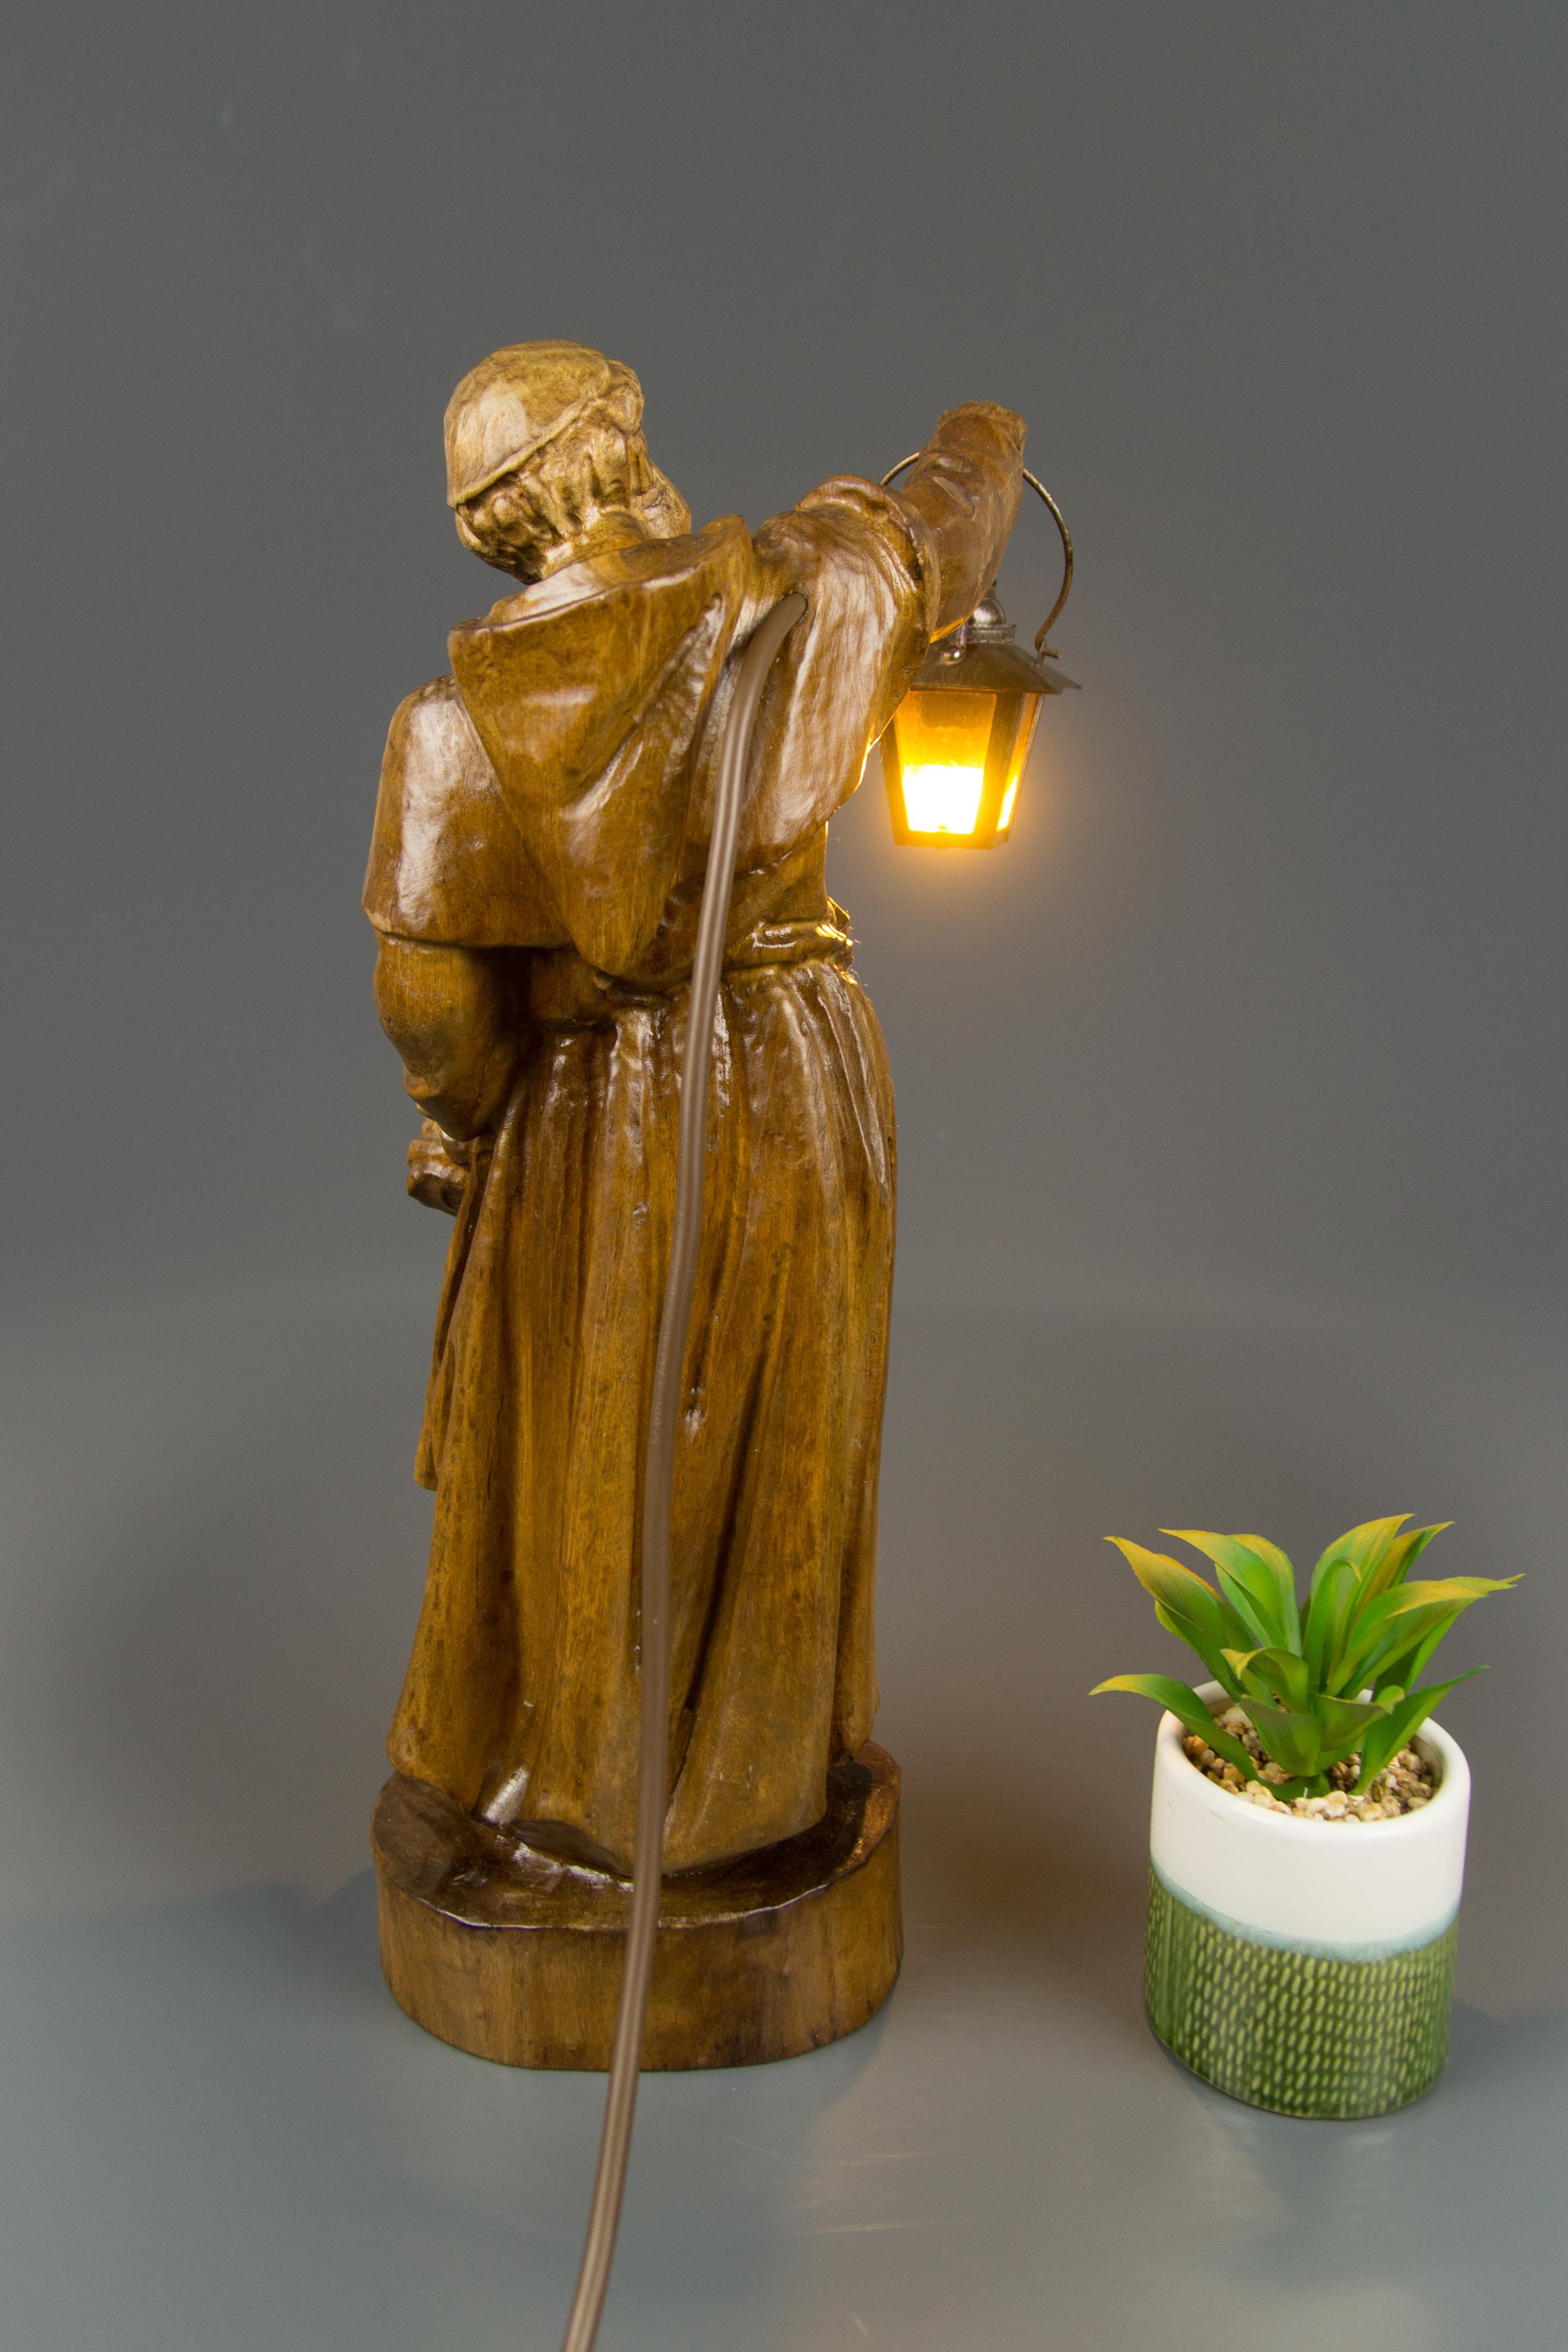 20th Century German Hand Carved Wooden Sculpture Figurative Lamp Monk with Lantern